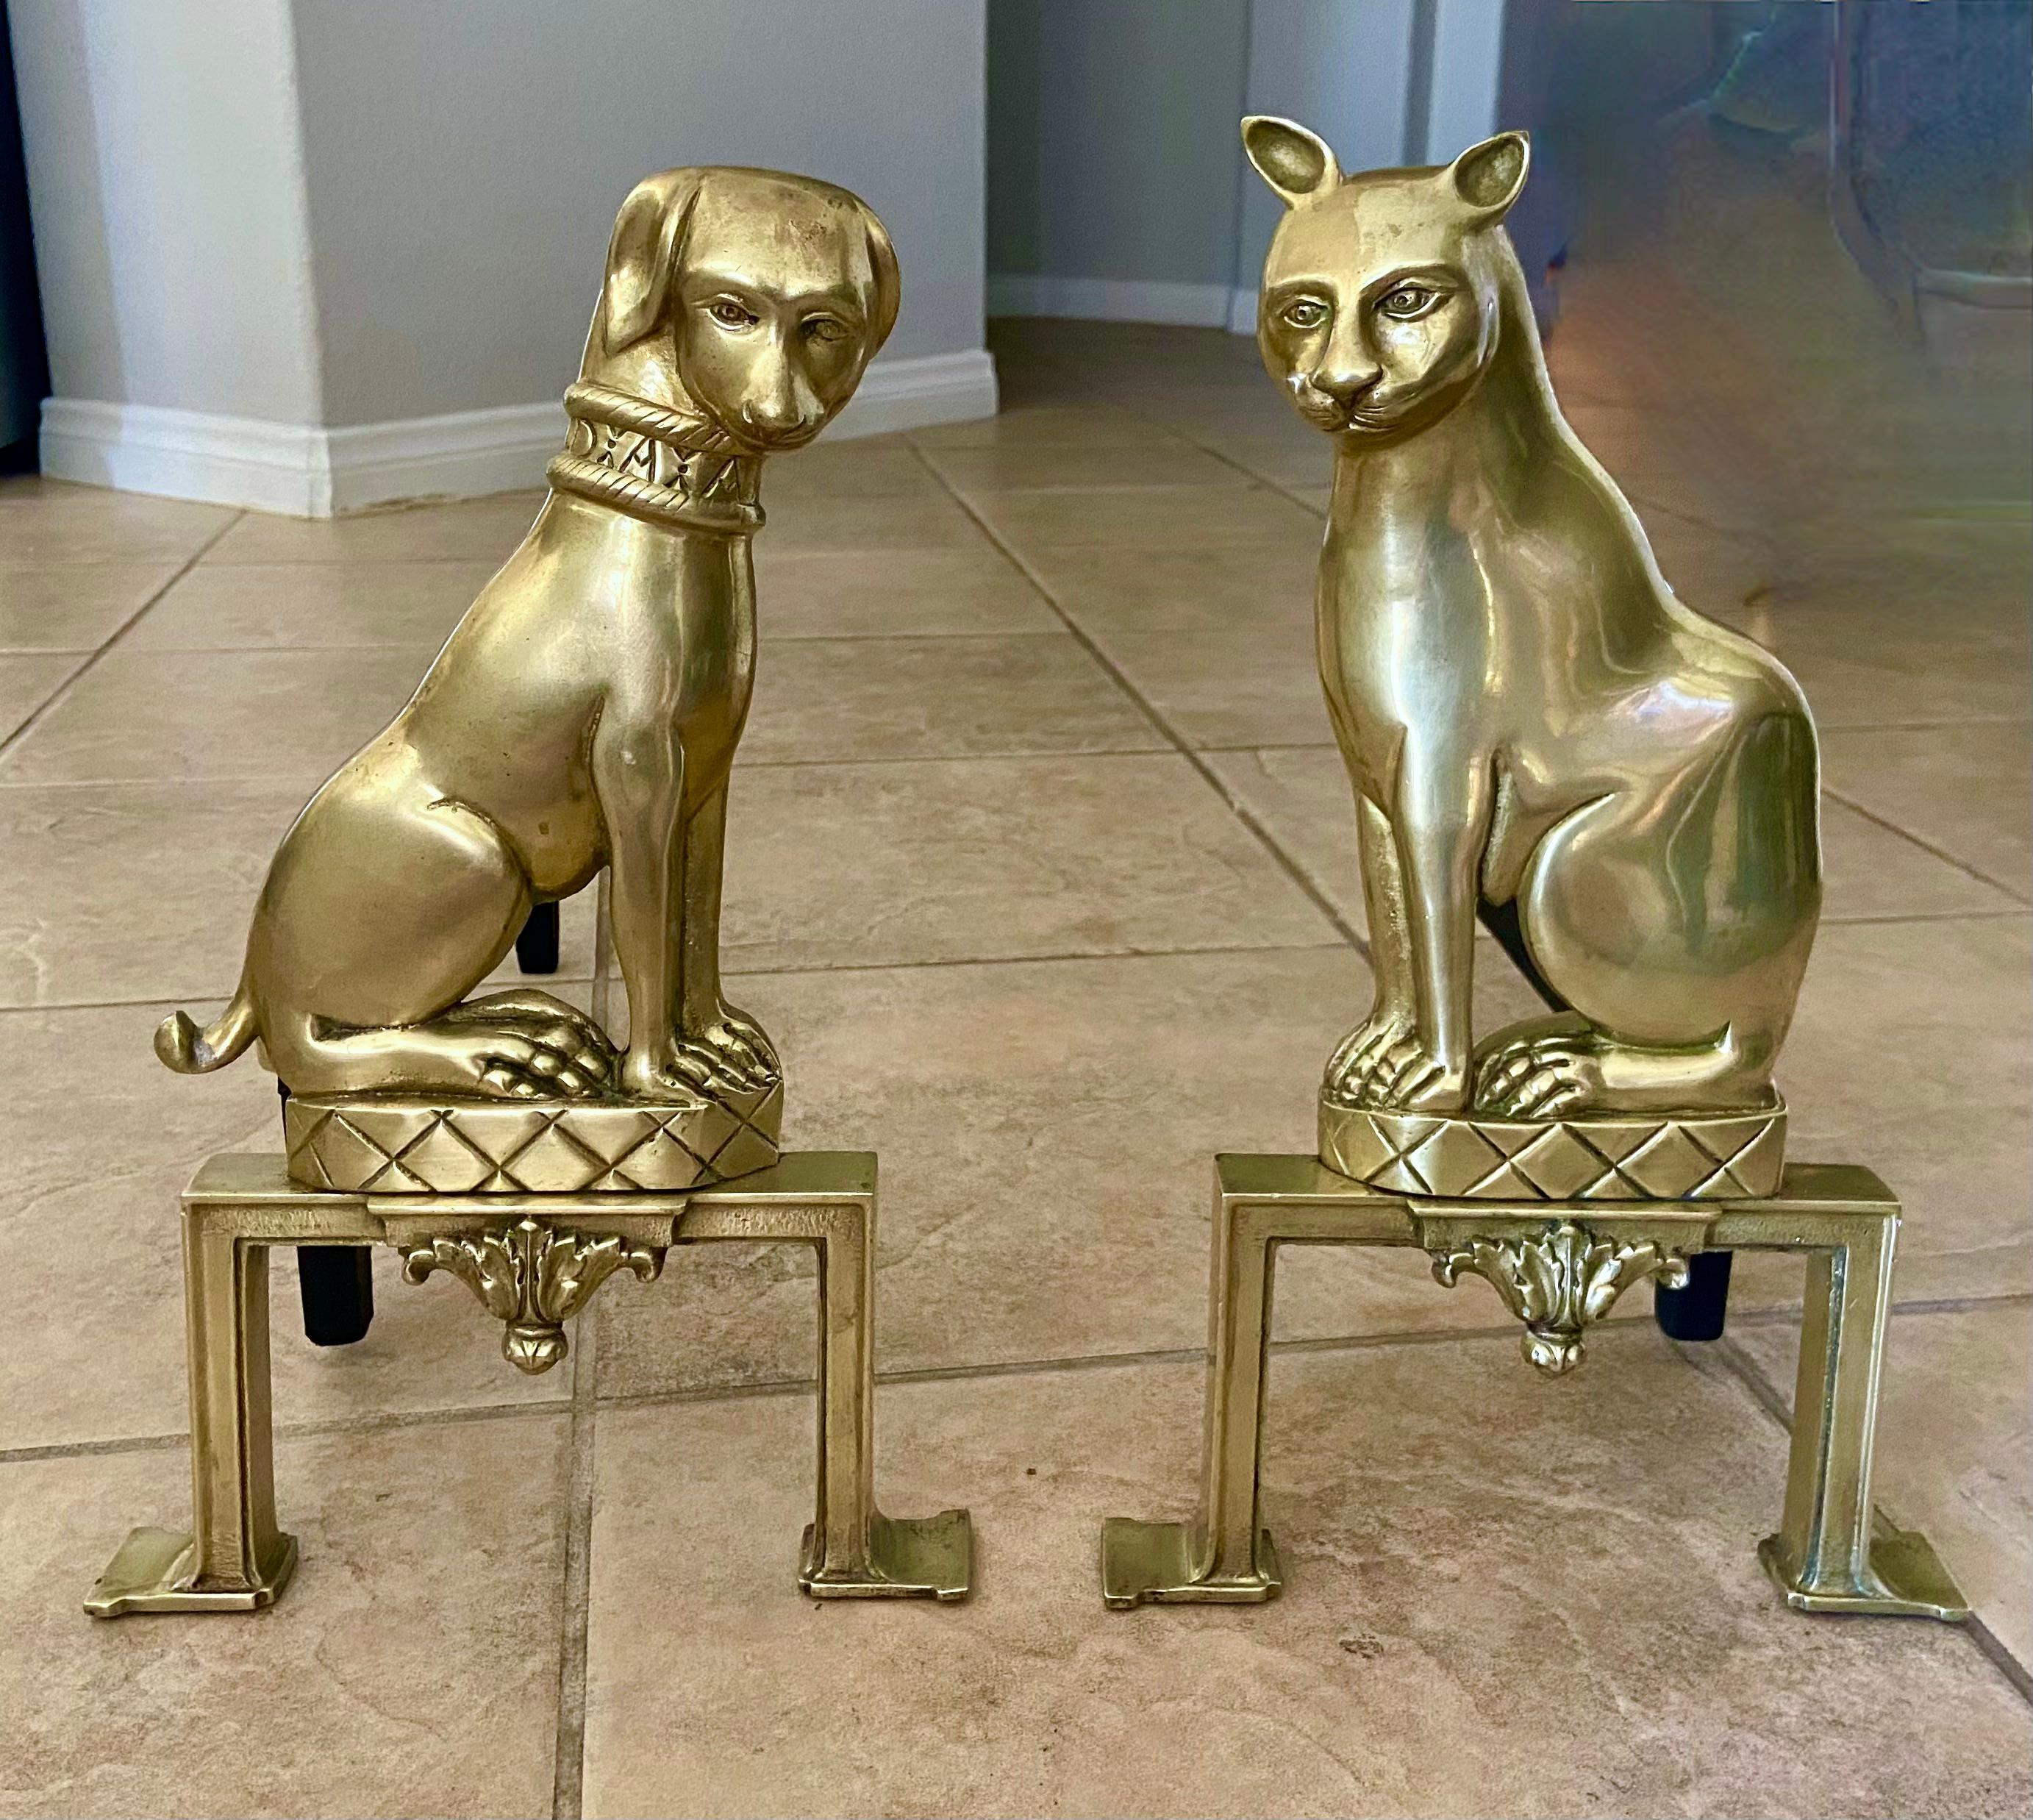 Pair of 19th century French solid brass dog and cat fireplace andirons or chenets. Expertly crafted with fine detailing throughout. It's very rare (if not impossible) to find another pair available. I've seen some later recast examples, but lack the